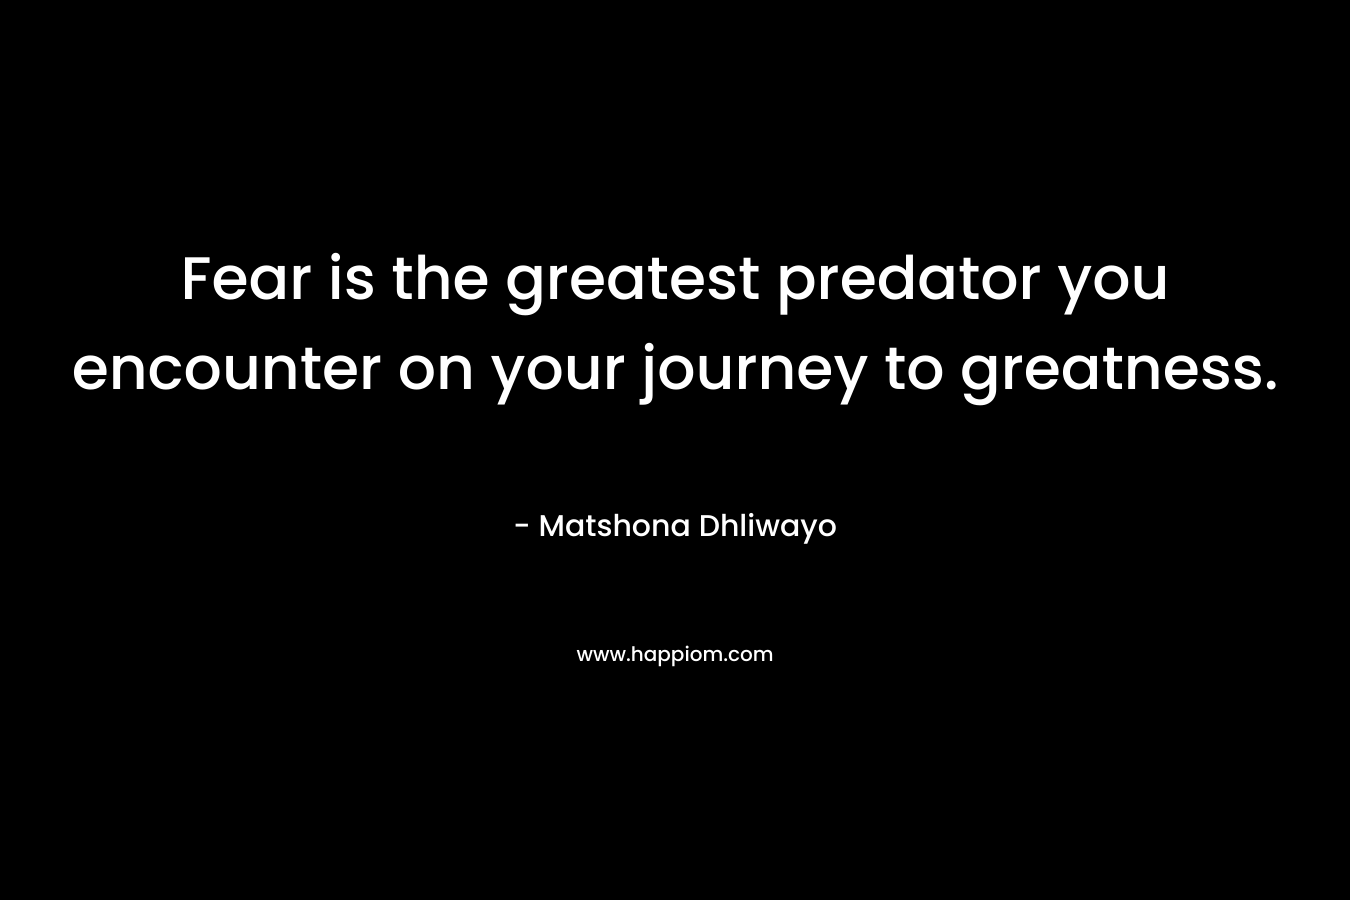 Fear is the greatest predator you encounter on your journey to greatness.